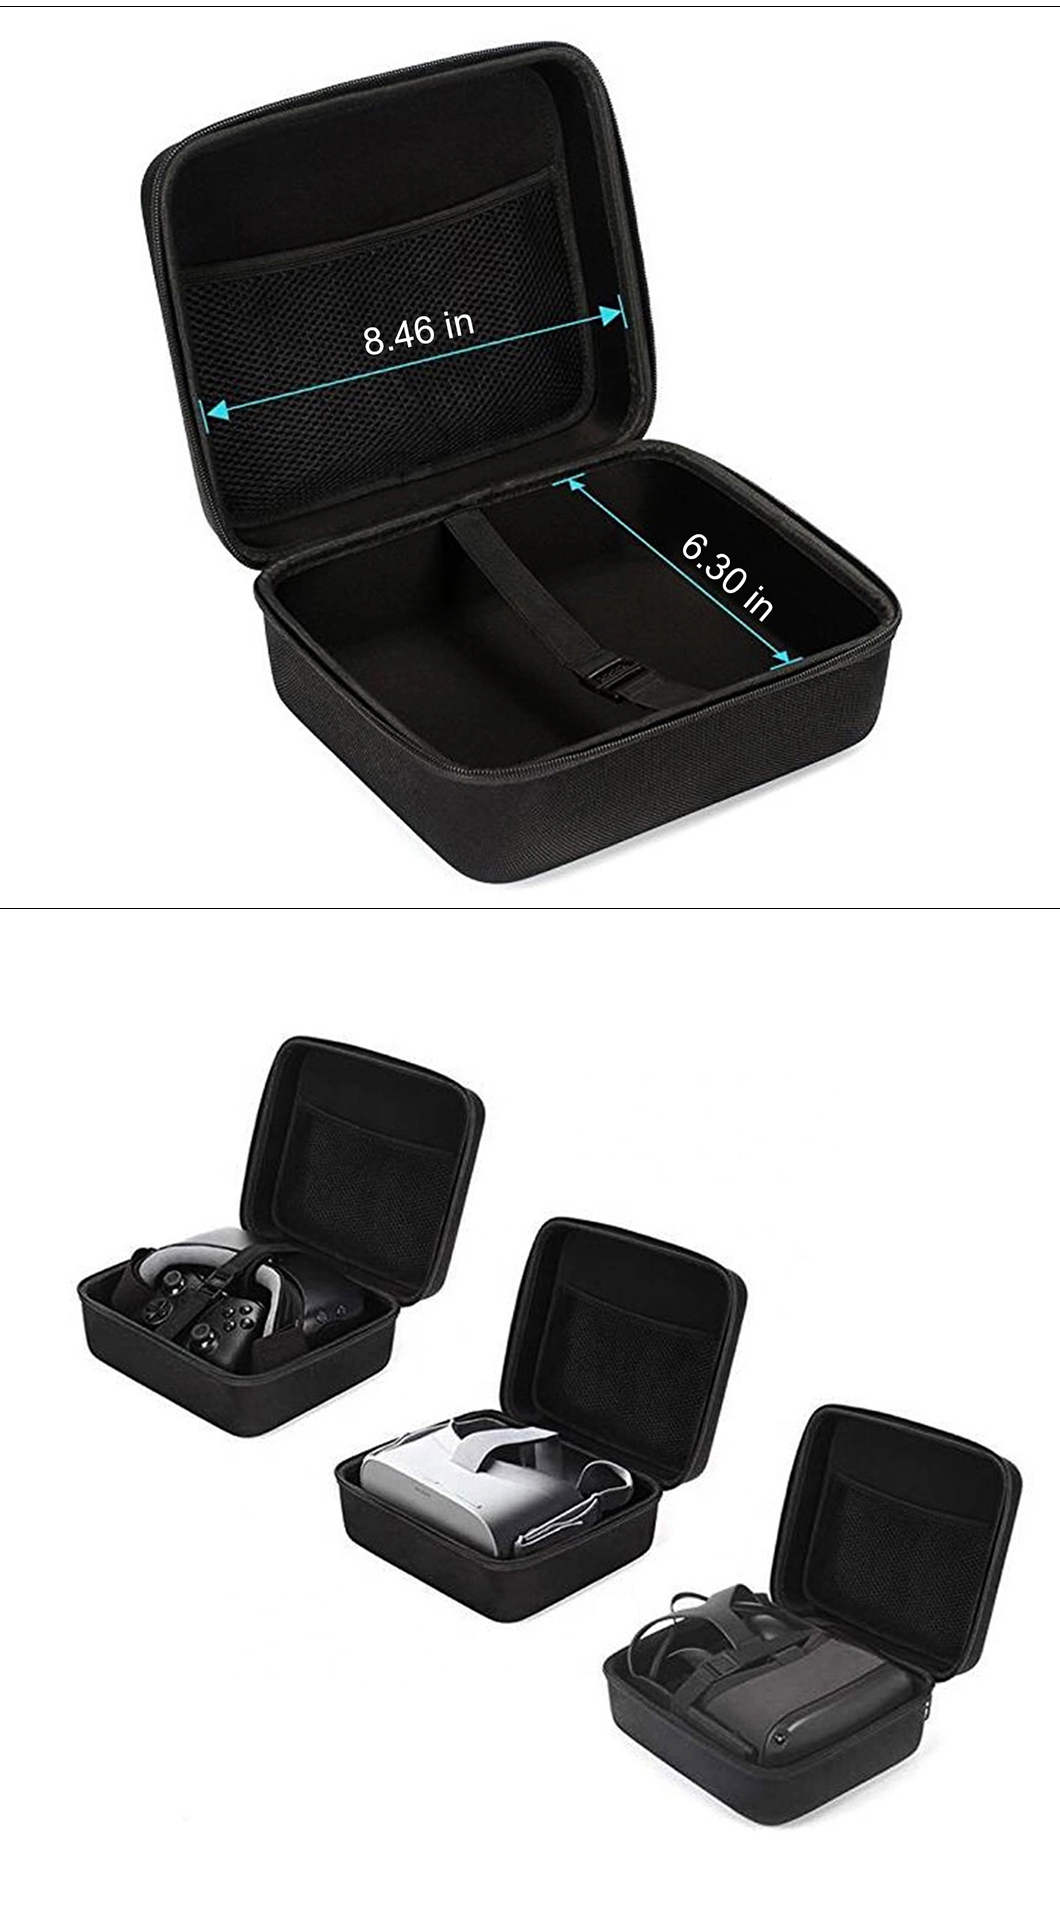 Hard EVA Case Protective Carry Bag Storage Box for VR Headset & Accessories(图2)